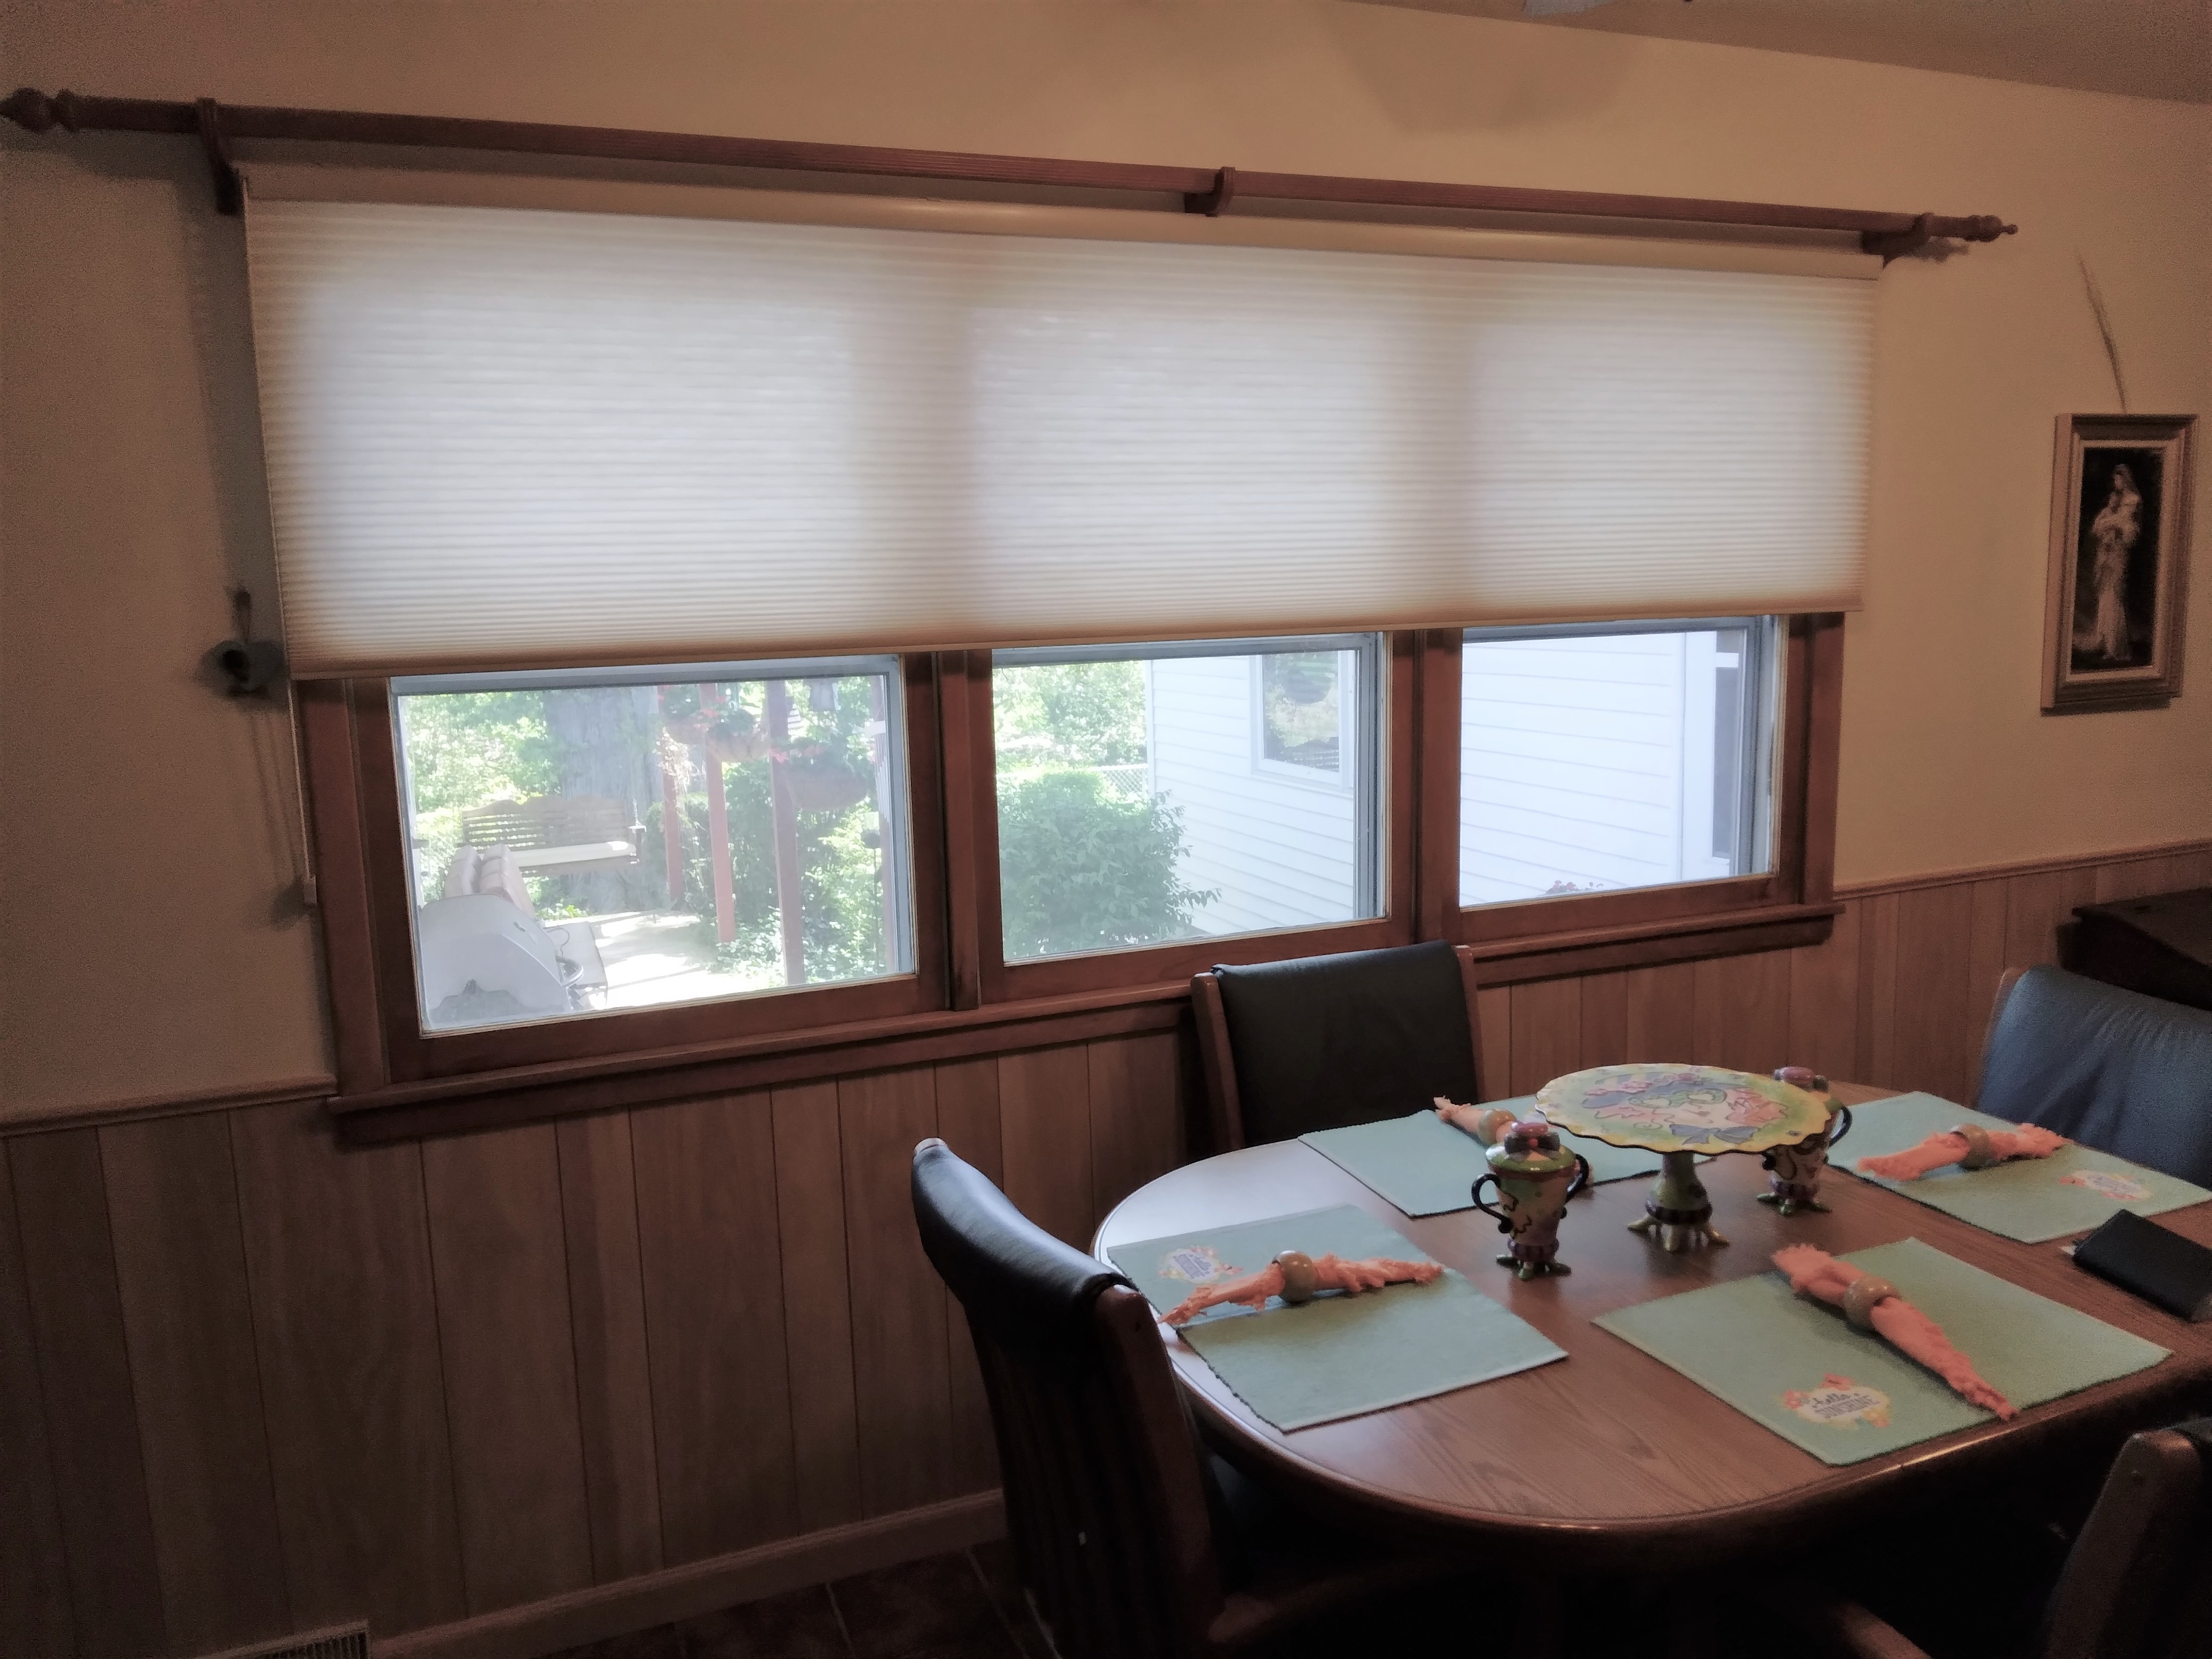 Cellular shades are a great option when you want one shade to cover a wide window.  BudgetBlinds  WindowCoverings  Shades  CellularShades  SpringfieldIllinois